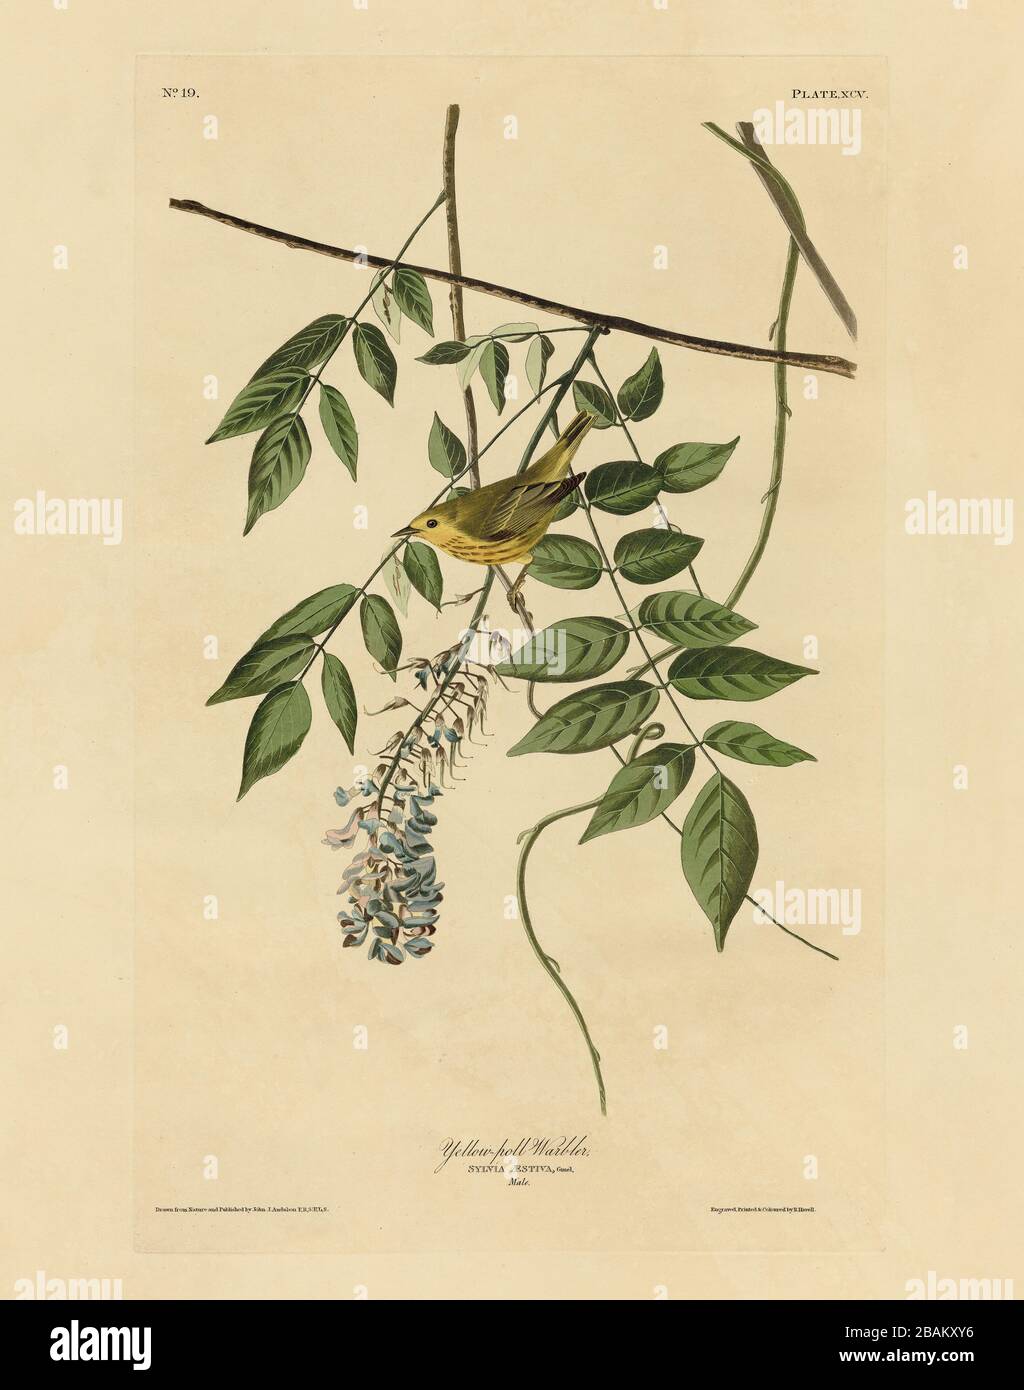 Plate 95 Yellow-poll Warbler (Yellow Warbler) The Birds of America folio (1827–1839) John James Audubon, Very high resolution and quality edited image Stock Photo